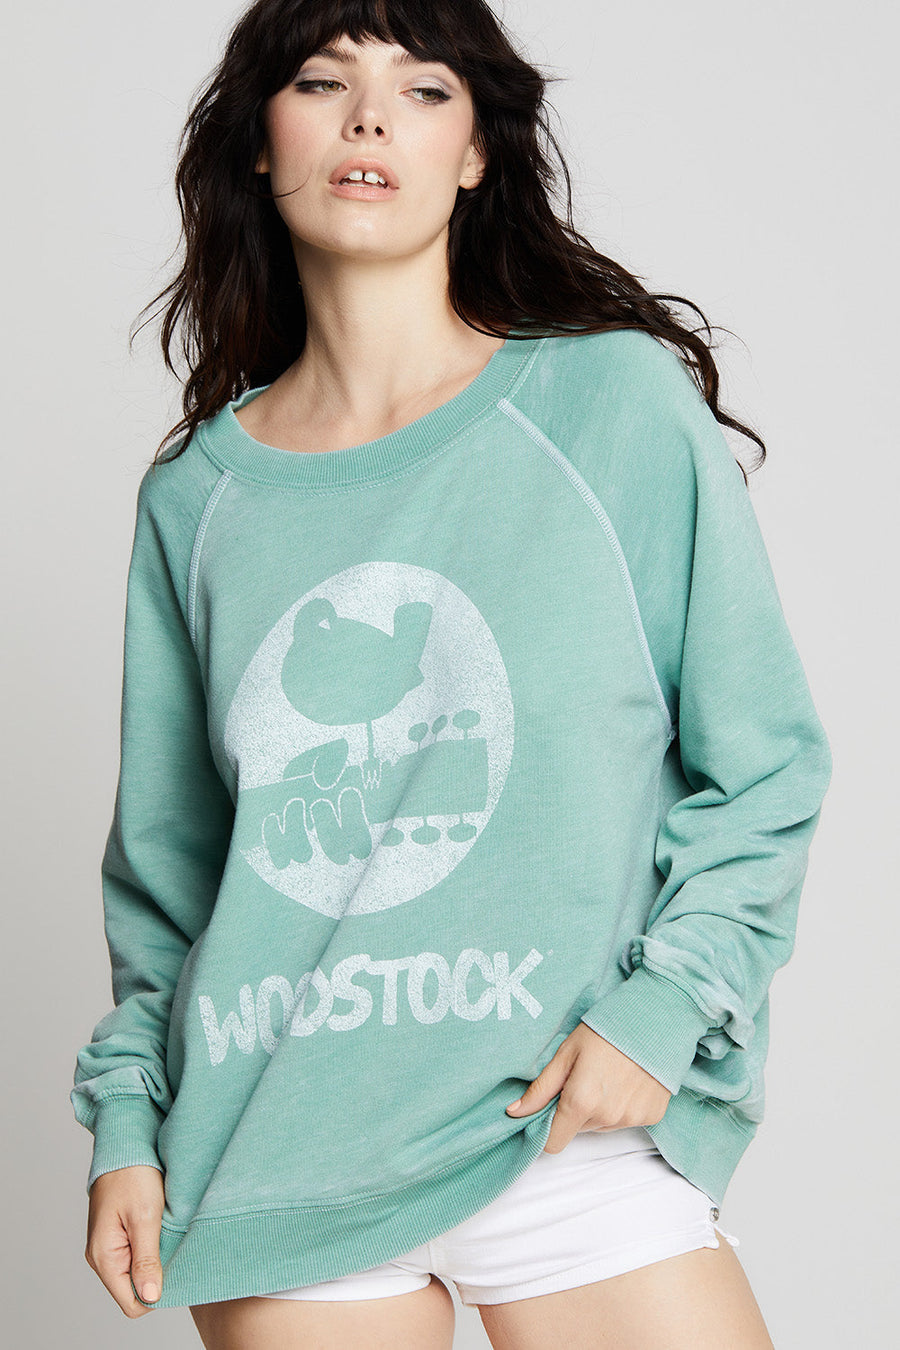 Woodstock Symbol Sweater 301322 Dill-Weed